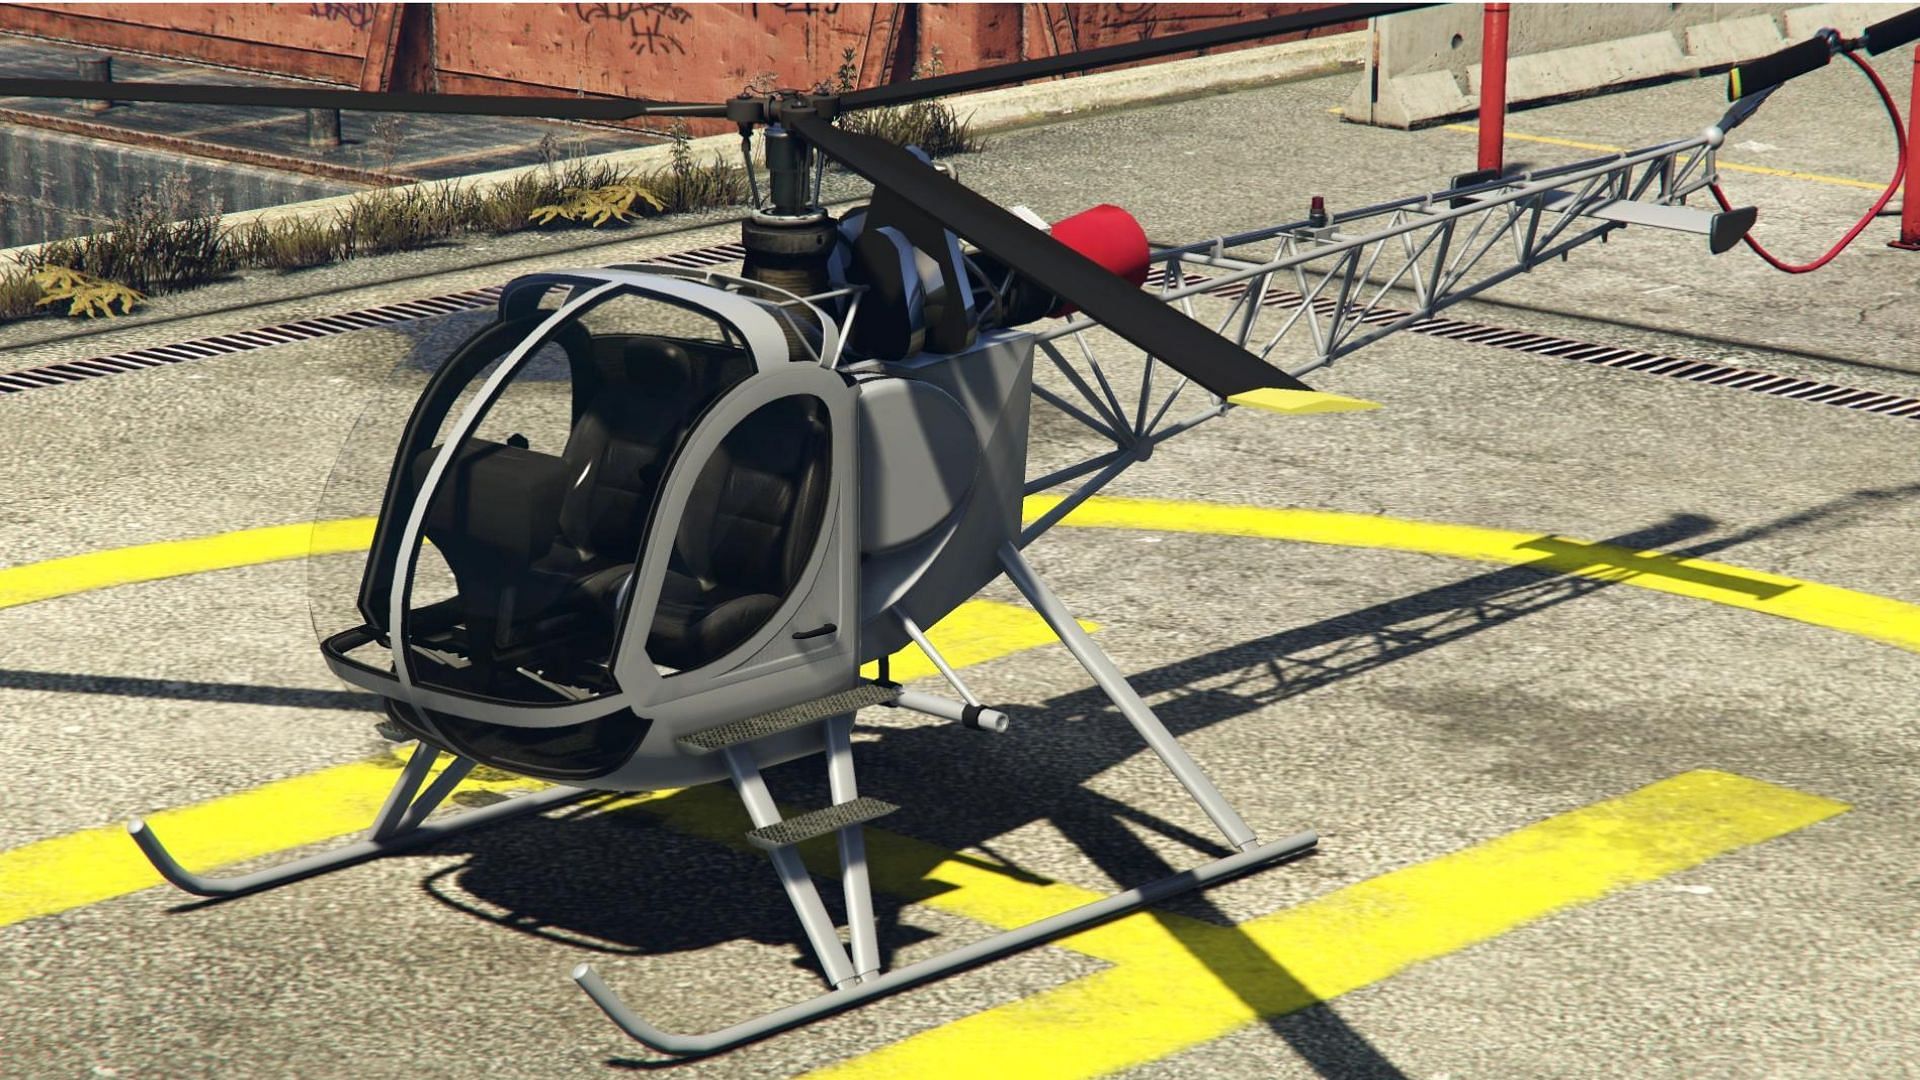 The new update has buffed the helicopter (Image via Rockstar Games)